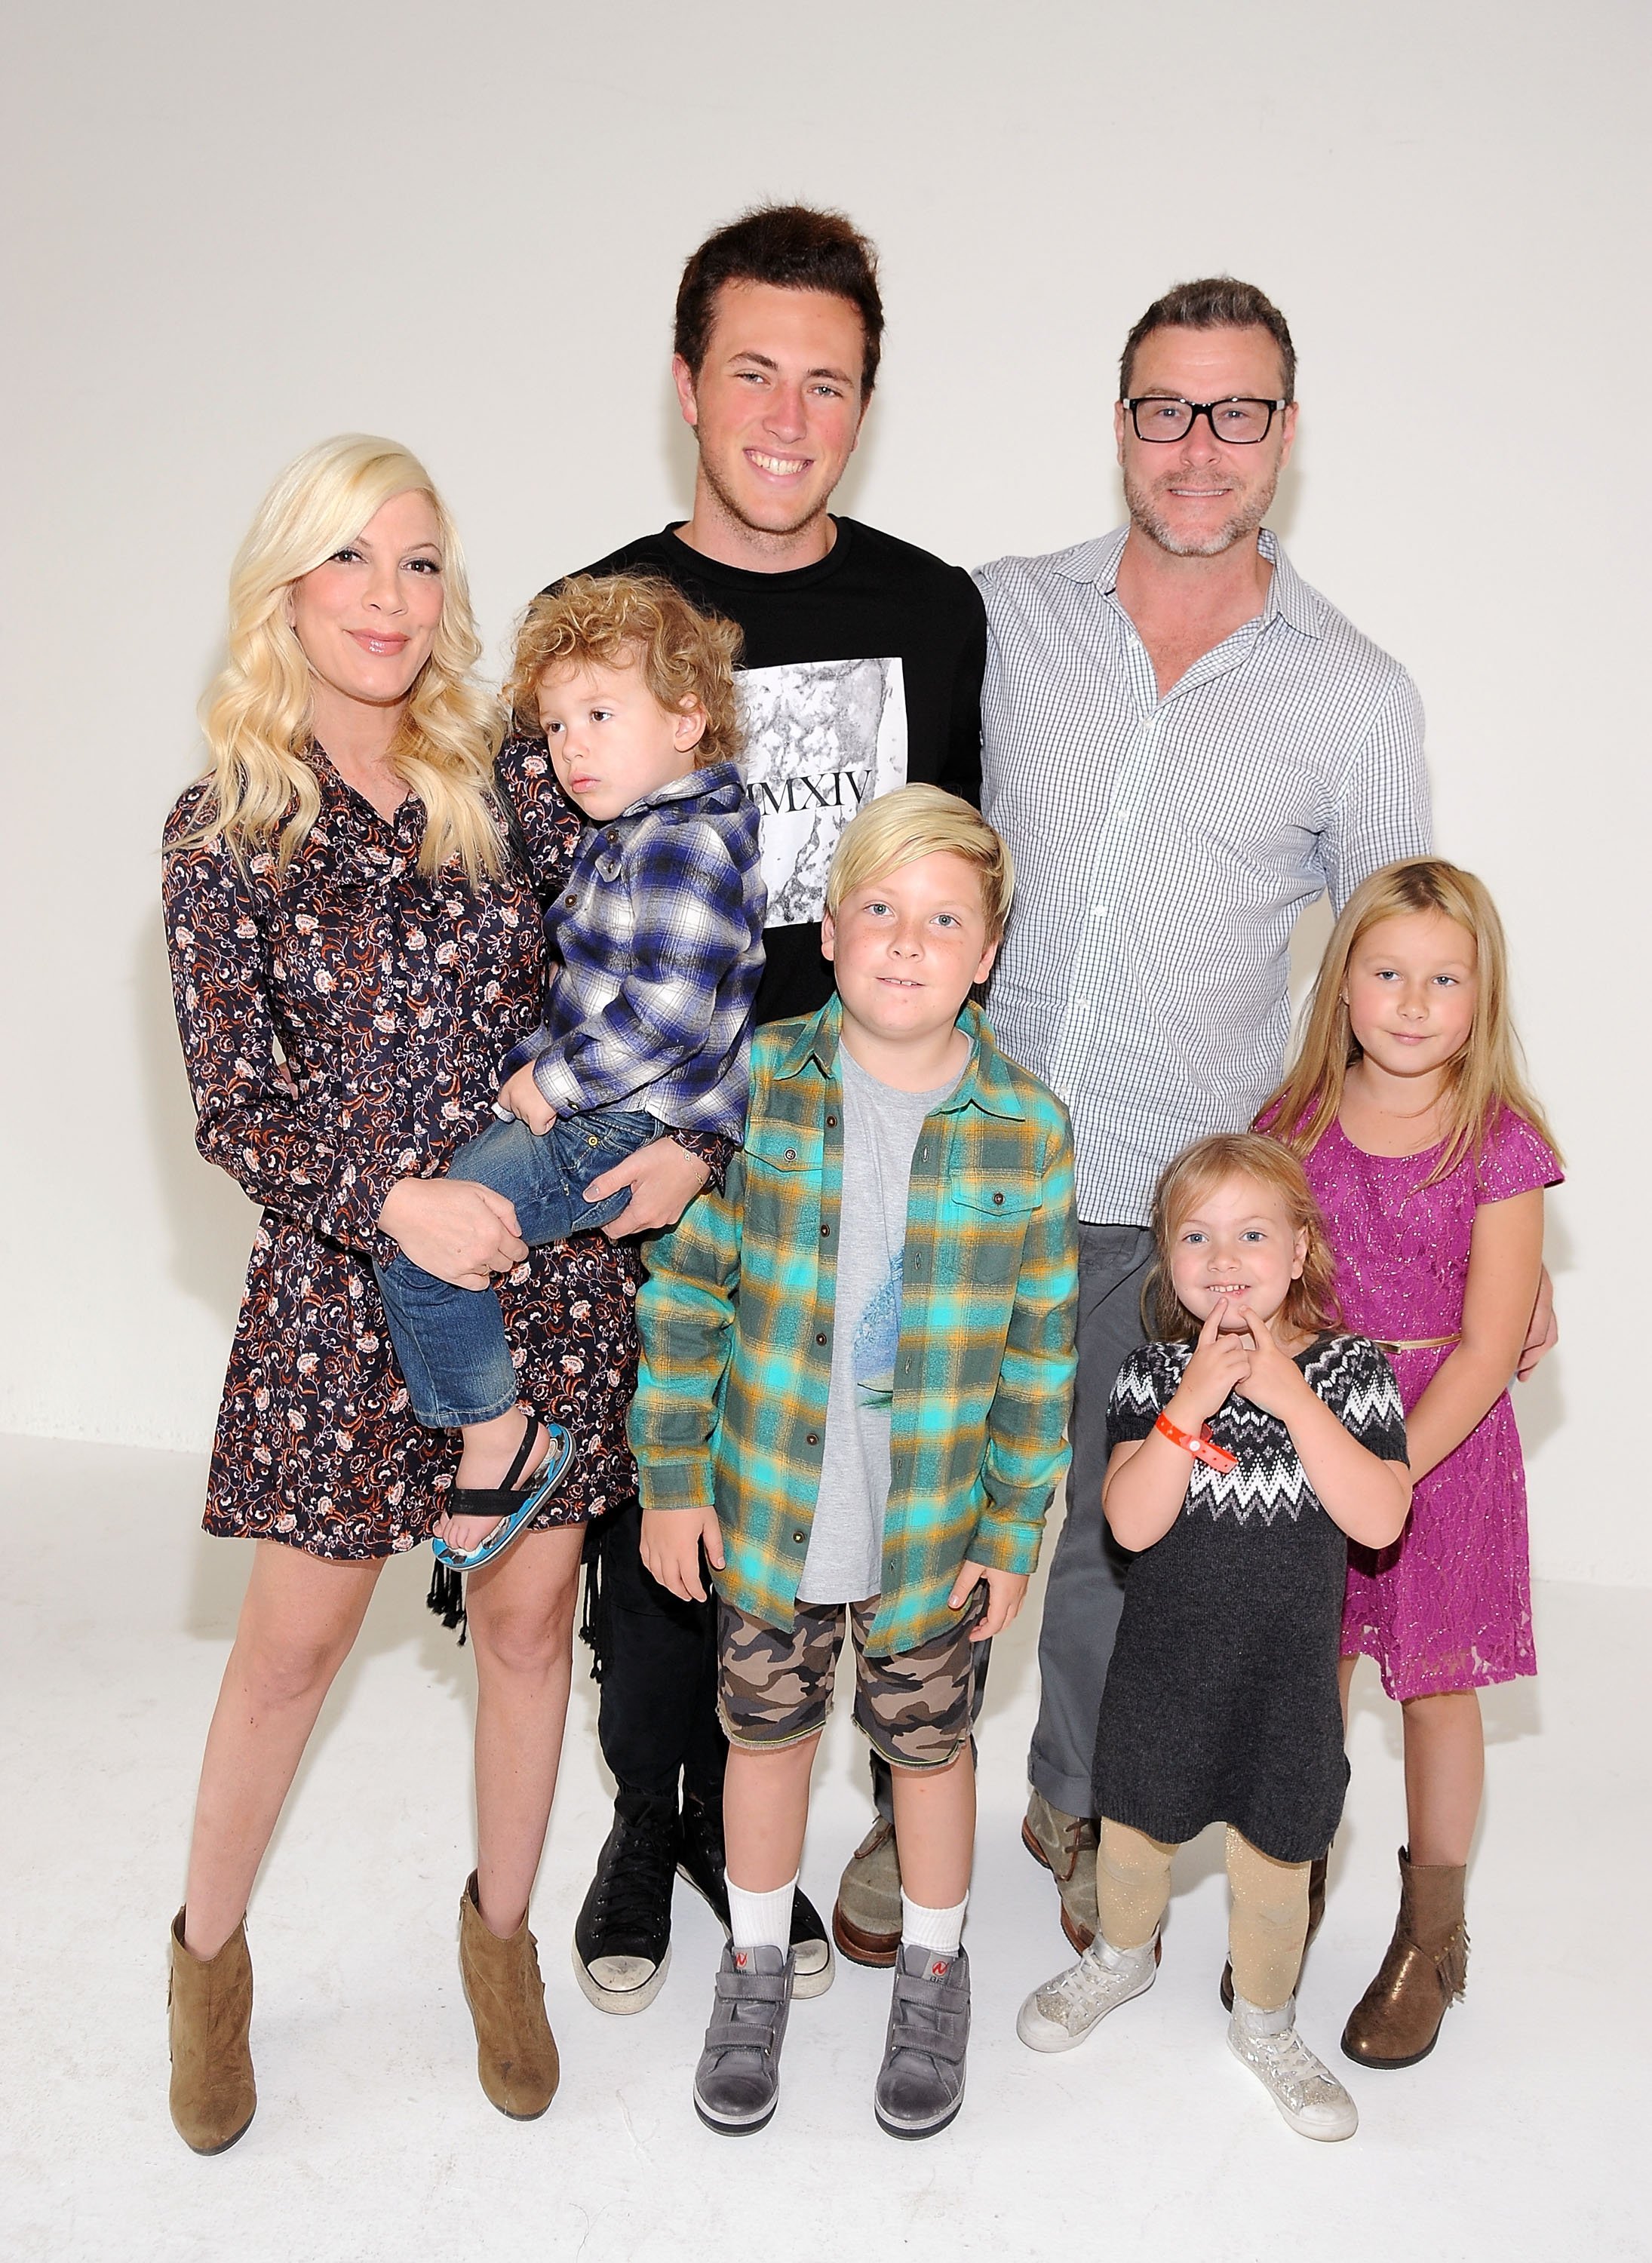 Tori Spelling and Dean McDermott with their kids Liam, Stella, Hattie, Beau, and Finn. | Source: Getty Images